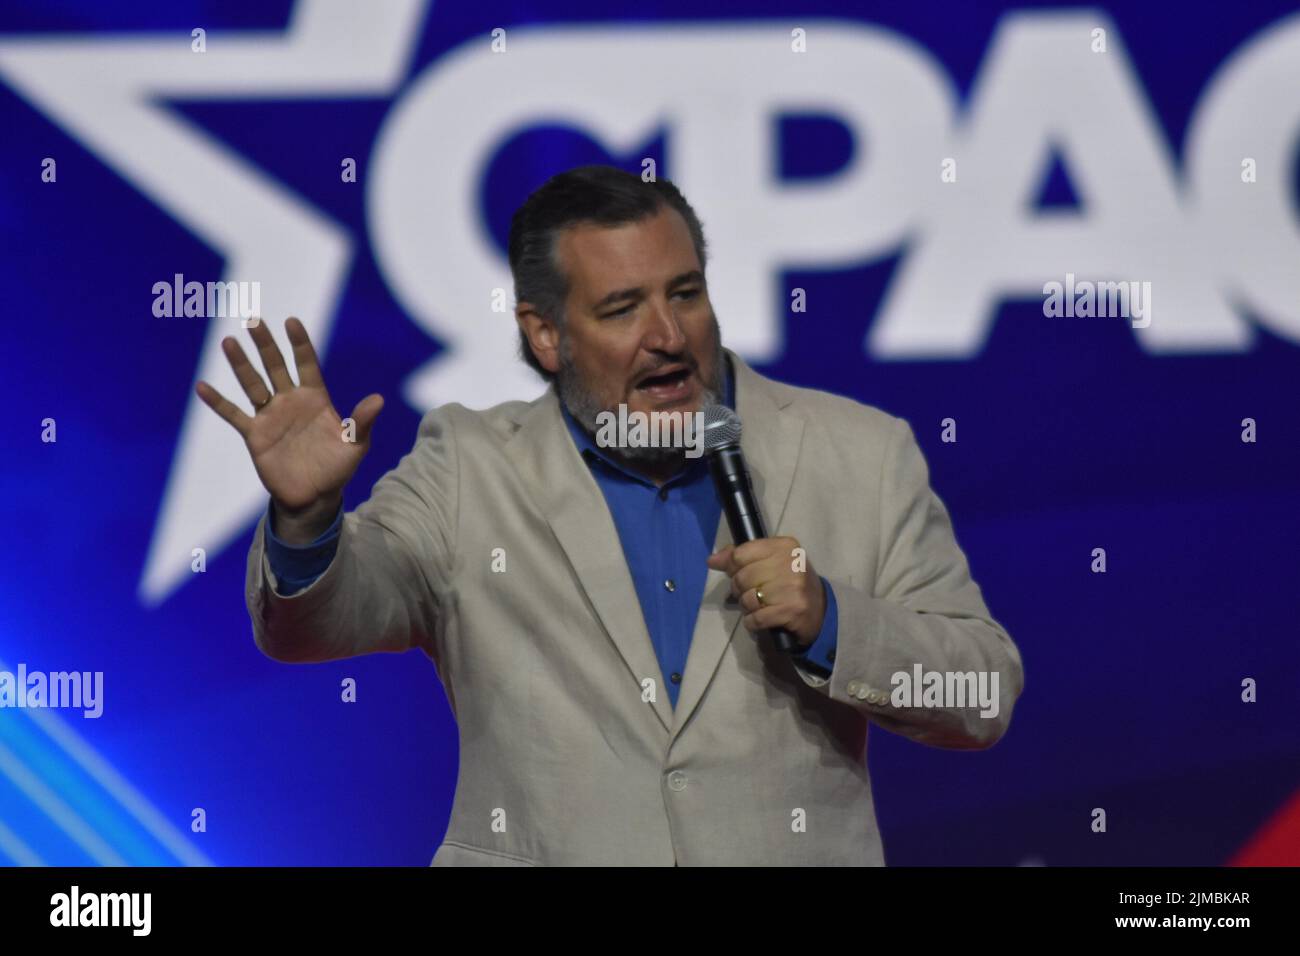 Dallas, Texas, USA. 5th Aug, 2022. (NEW) Ted Cruz delivers remarks at the Conservative Political Action Conference 2022 in Dallas, Texas. August 5, 2022, Dallas, TX, USA. Ted Cruz delivers remarks during the Conservative Political Action Conference (CPAC), held in the state of Texas, in United States, on Friday (5). Ted Cruz is an American politician and attorney serving as the junior United States senator for Texas since 2013. A member of the Republican Party, Cruz served as Solicitor General of Texas from 2003 to 2008. The conference is broadcast live on the CPAC website and online on Fox N Stock Photo